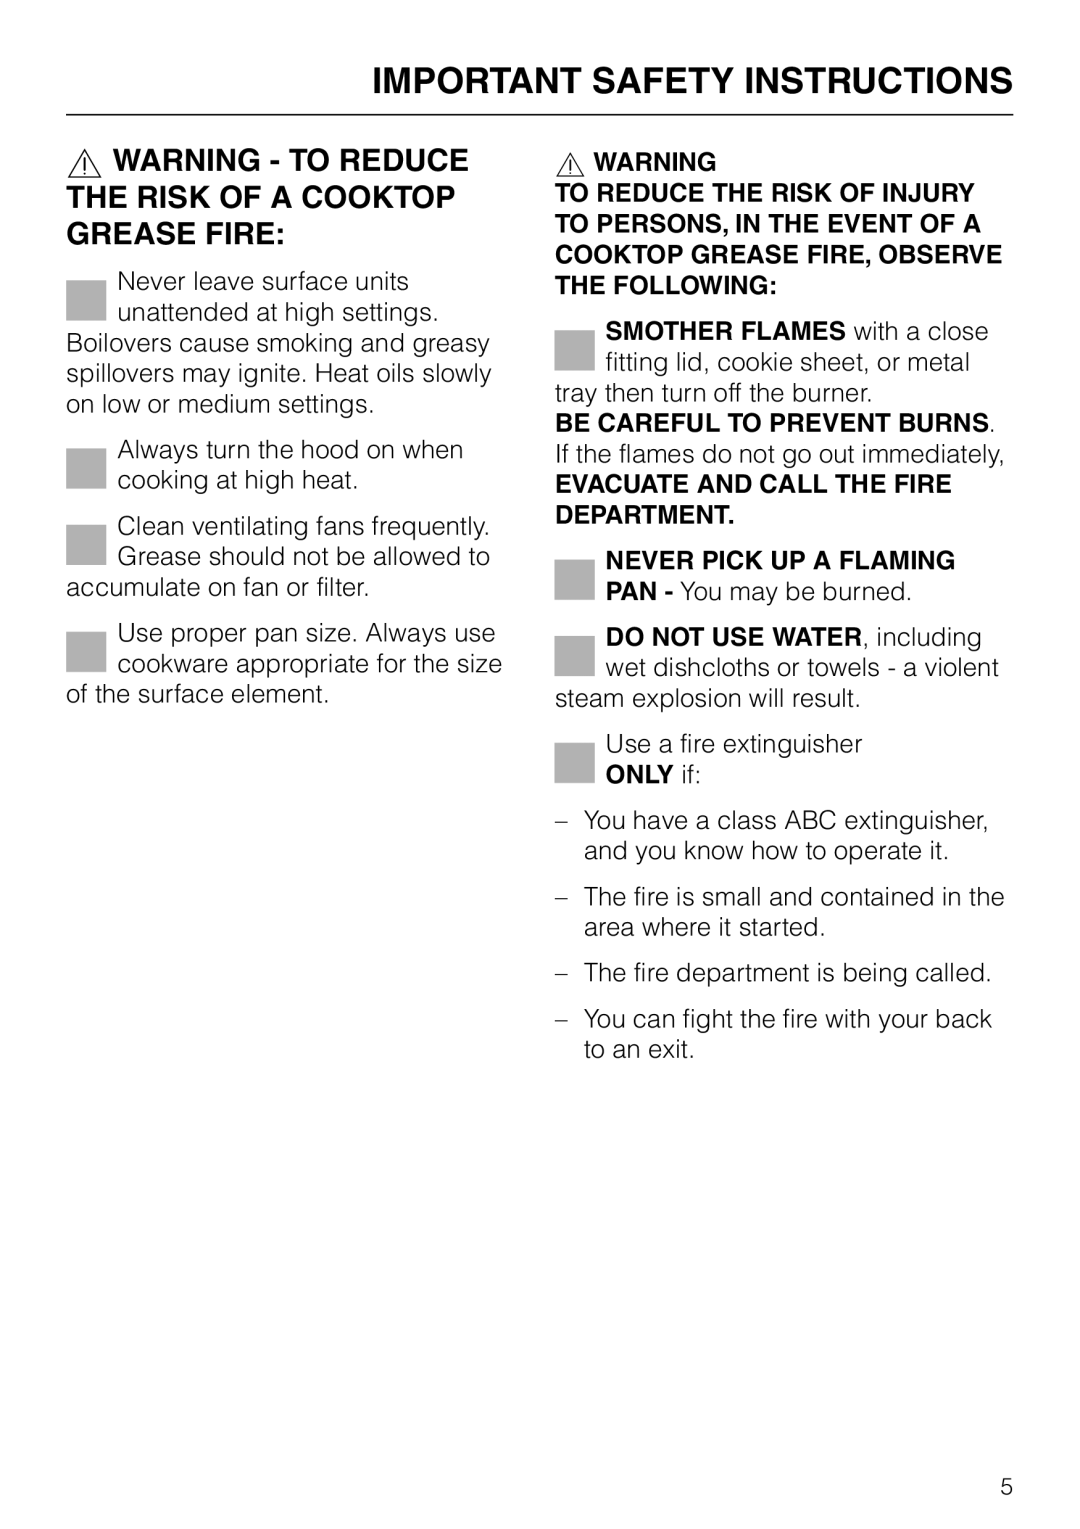 Miele DA 270-4 installation instructions Important Safety Instructions, Be Careful To Prevent Burns 